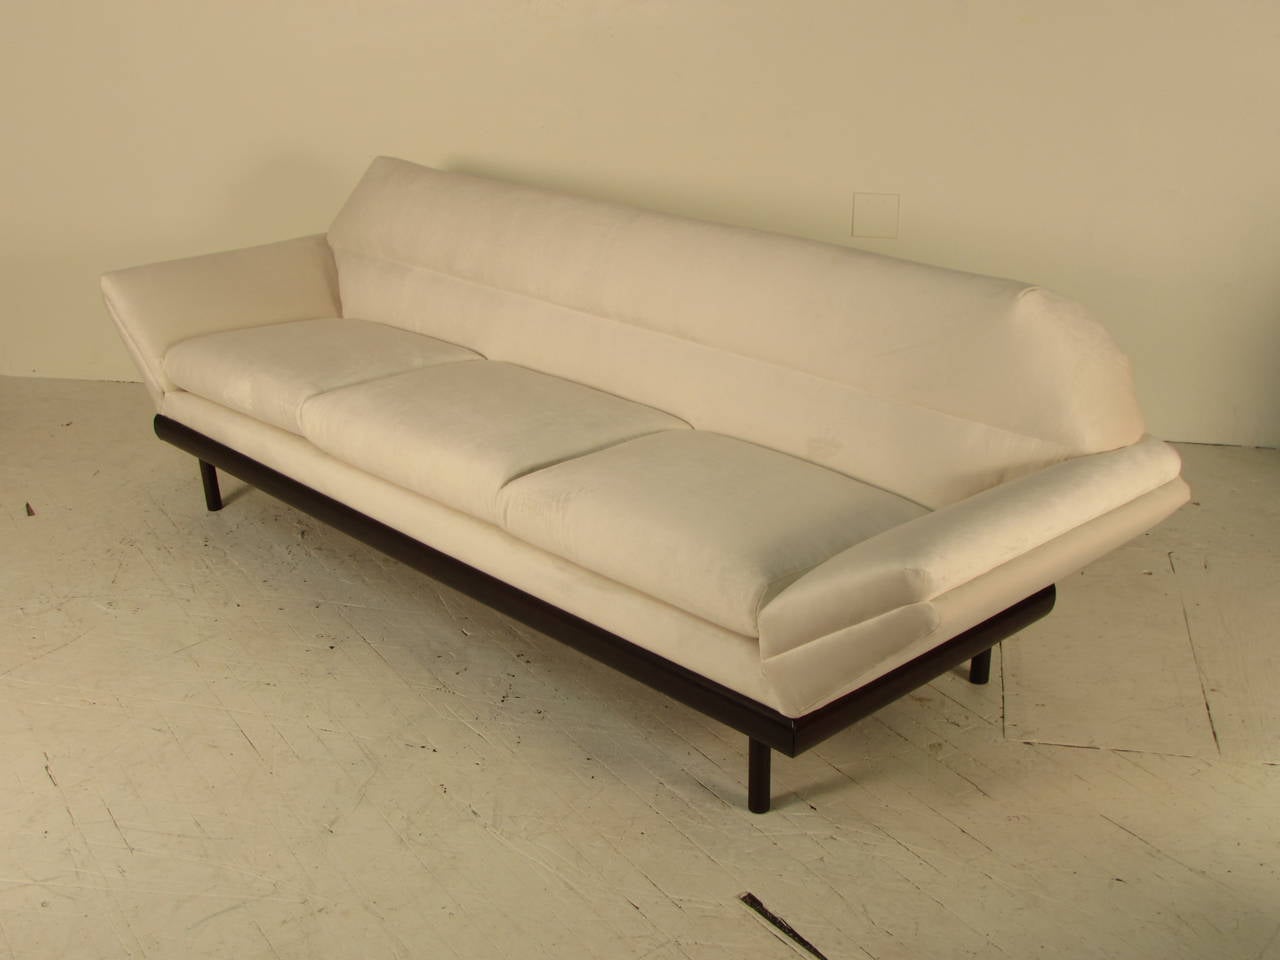 Absolutely fabulous Mid-Century Modern sofa in the style of Adrian Pearsall, but with sleek, Italian leanings. Dark walnut base has been fully restored and the sofa has just been reupholstered in an off-white velvet.